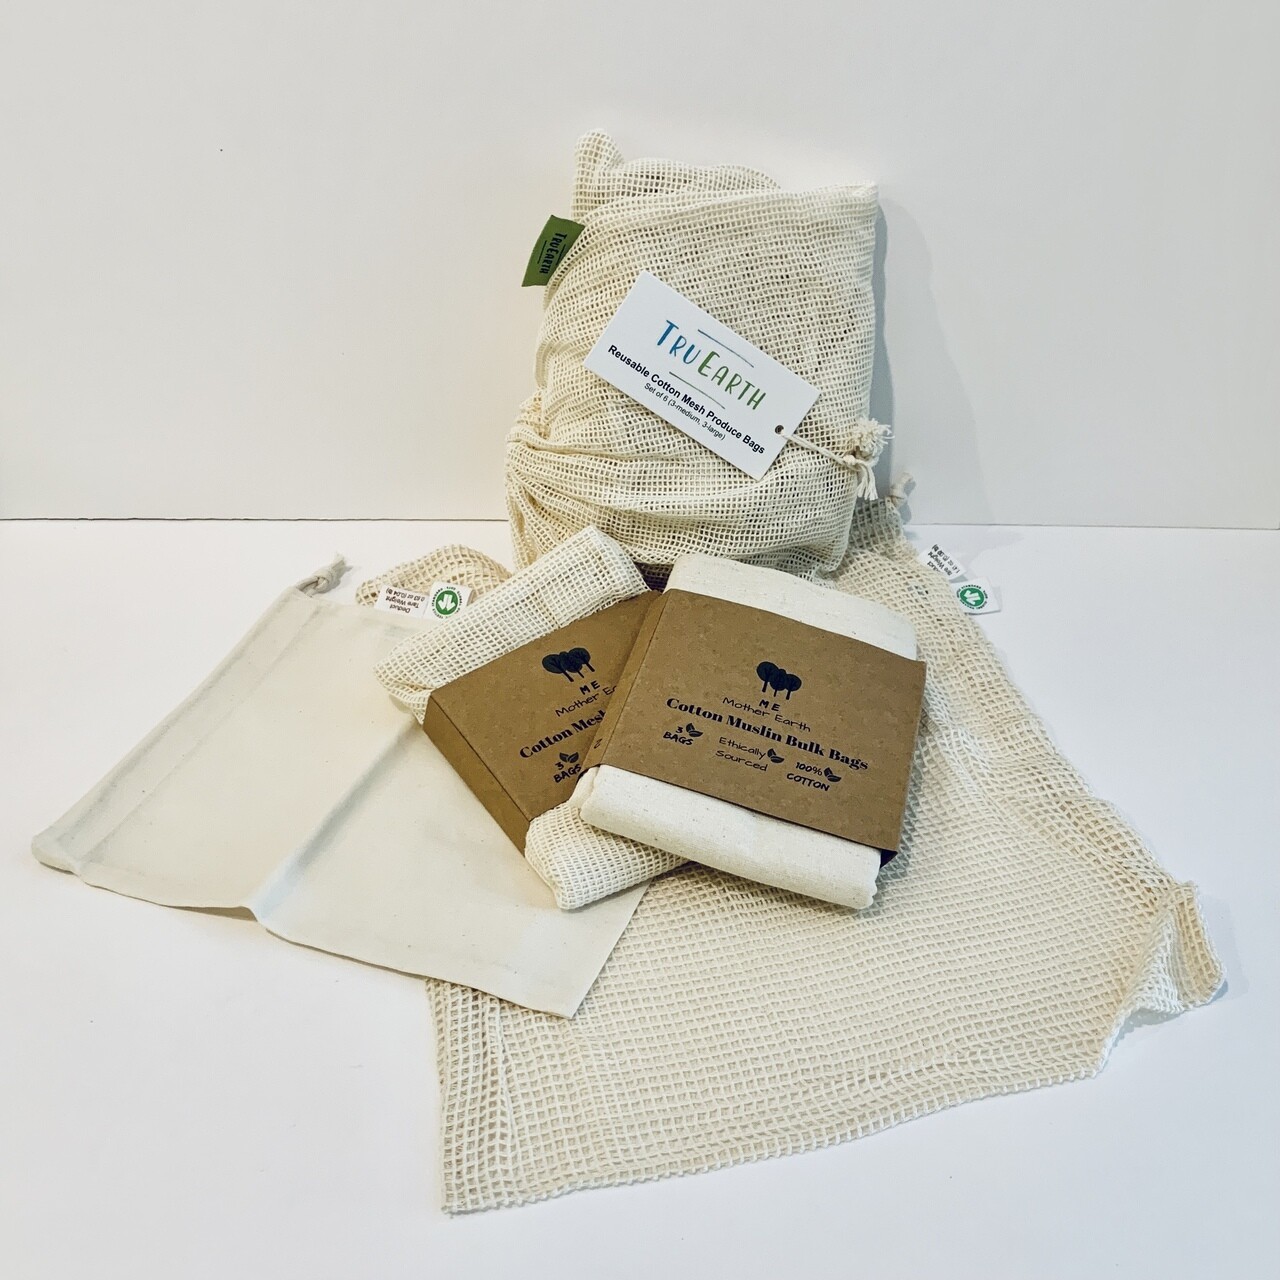 Cotton Produce Bags, Mesh or Woven